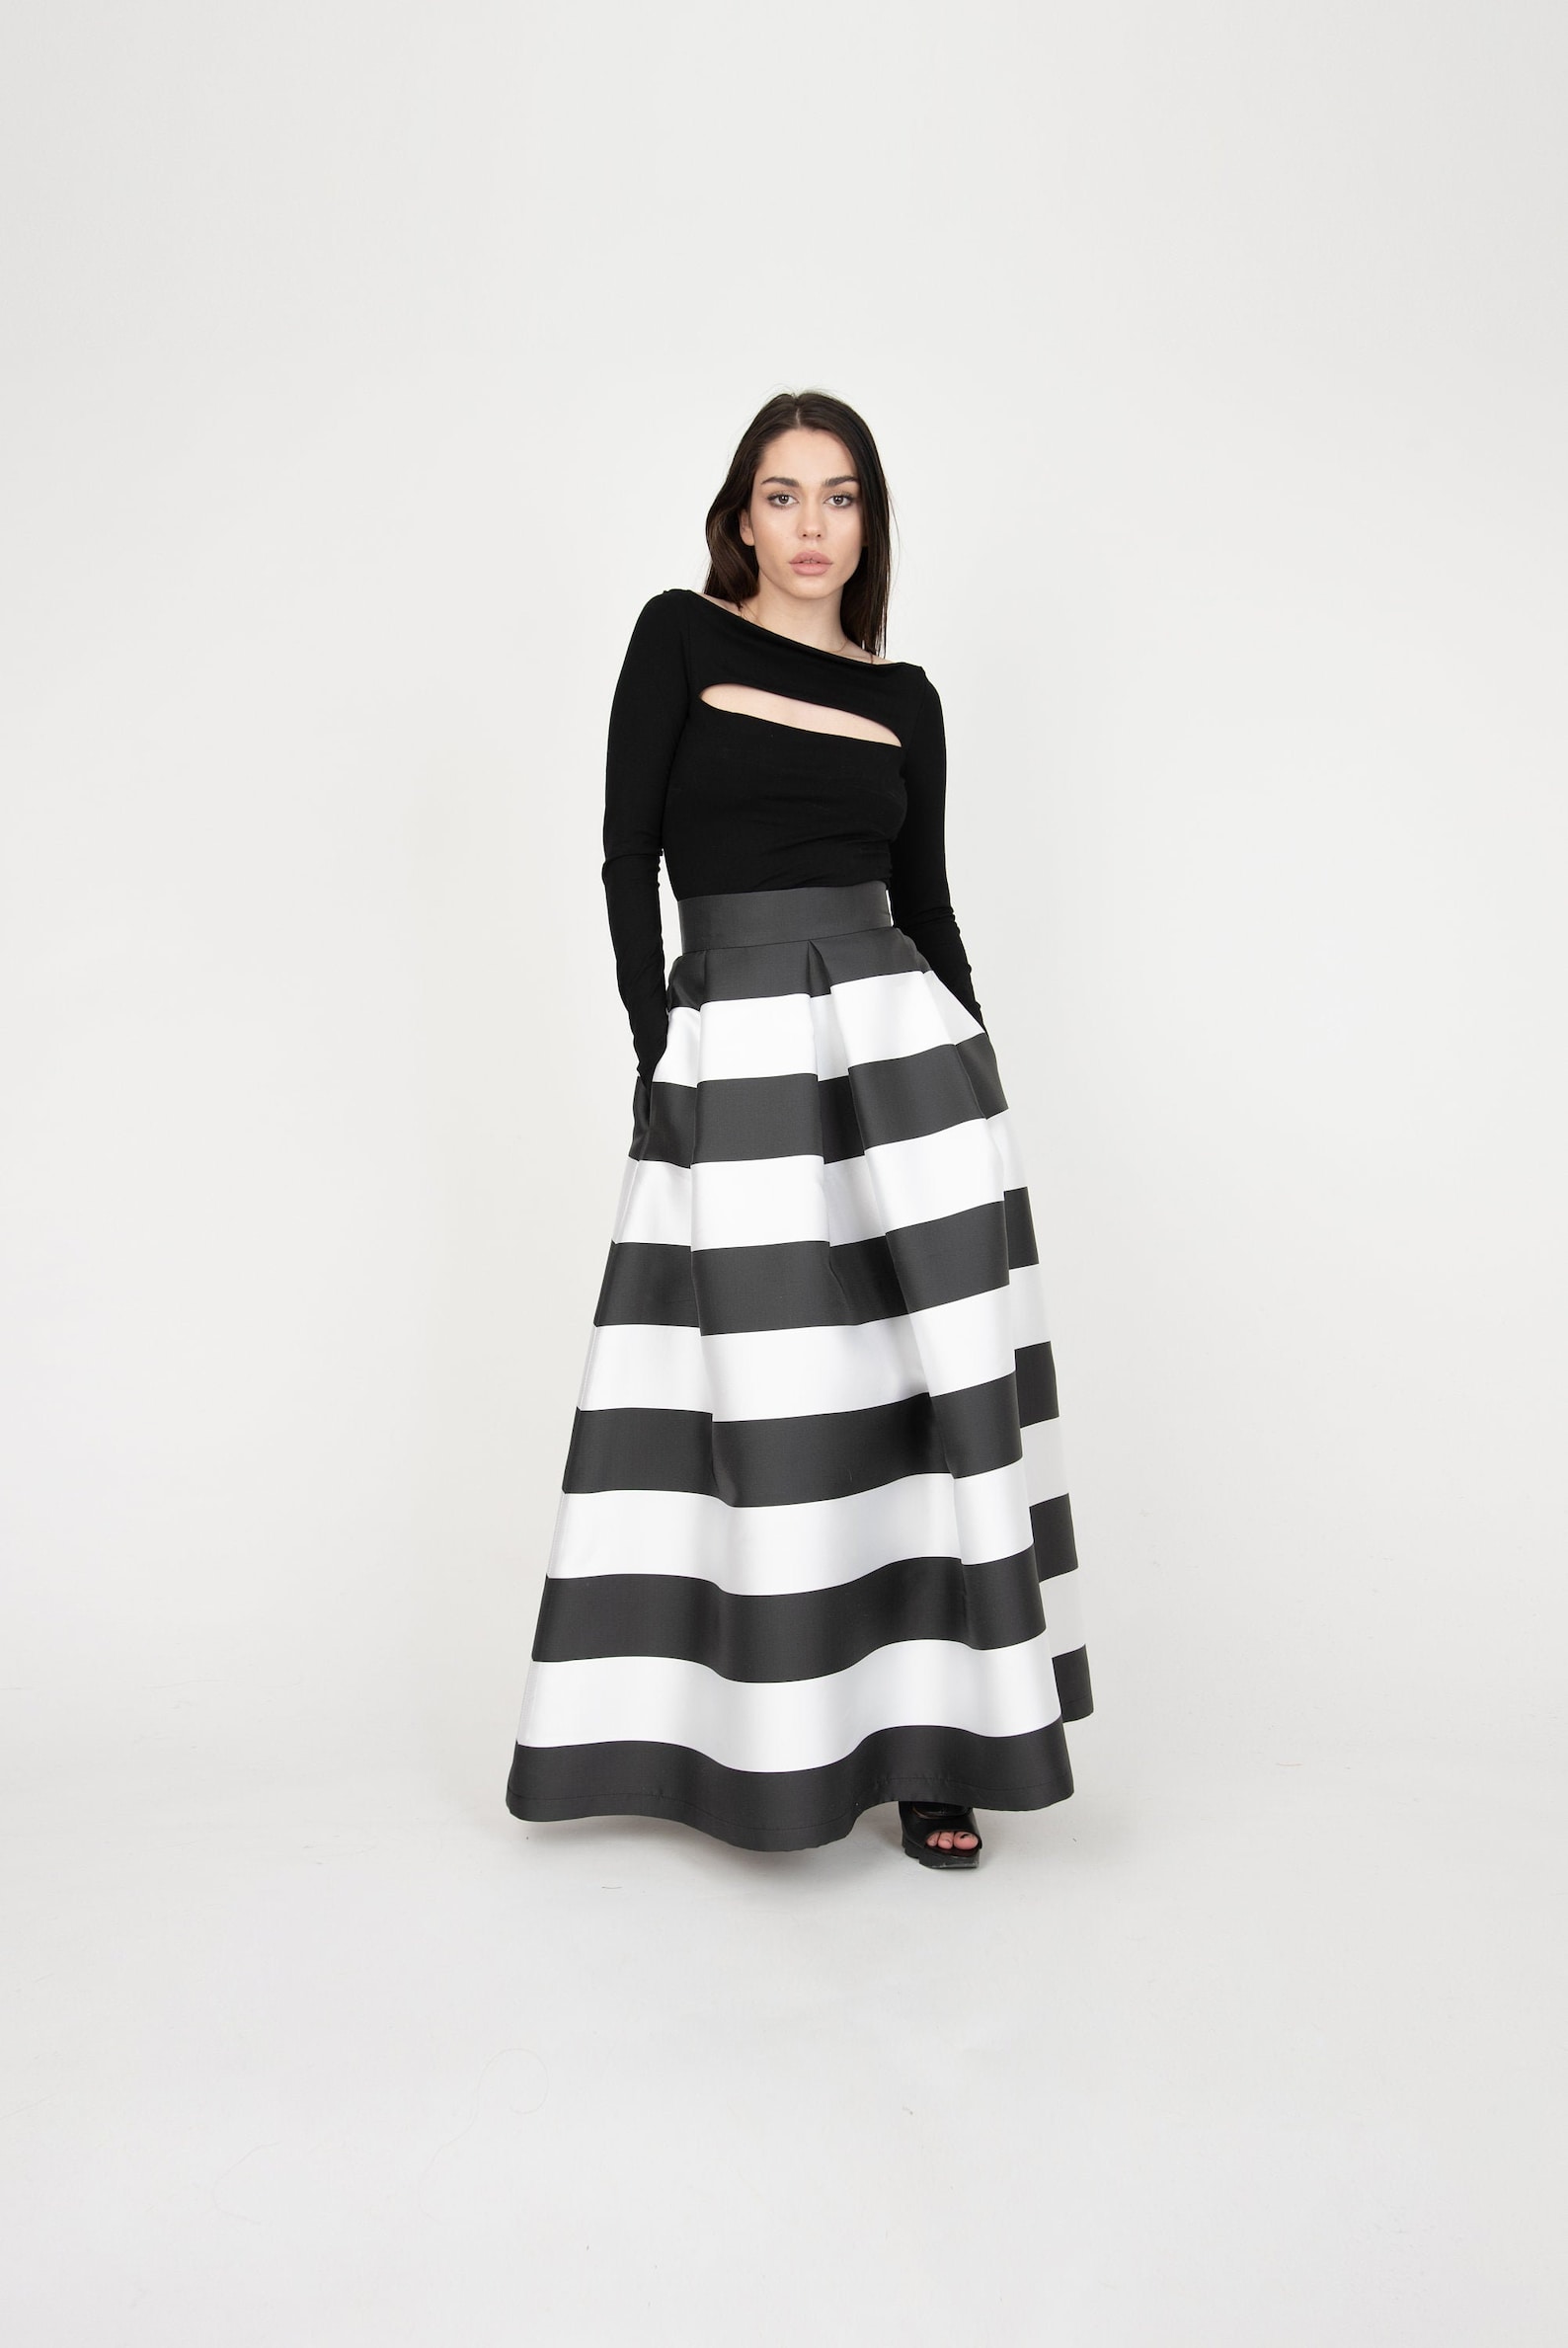 I love this long, flowy skirt. It has a classic appearance, giving comfort and elegance at the same time.